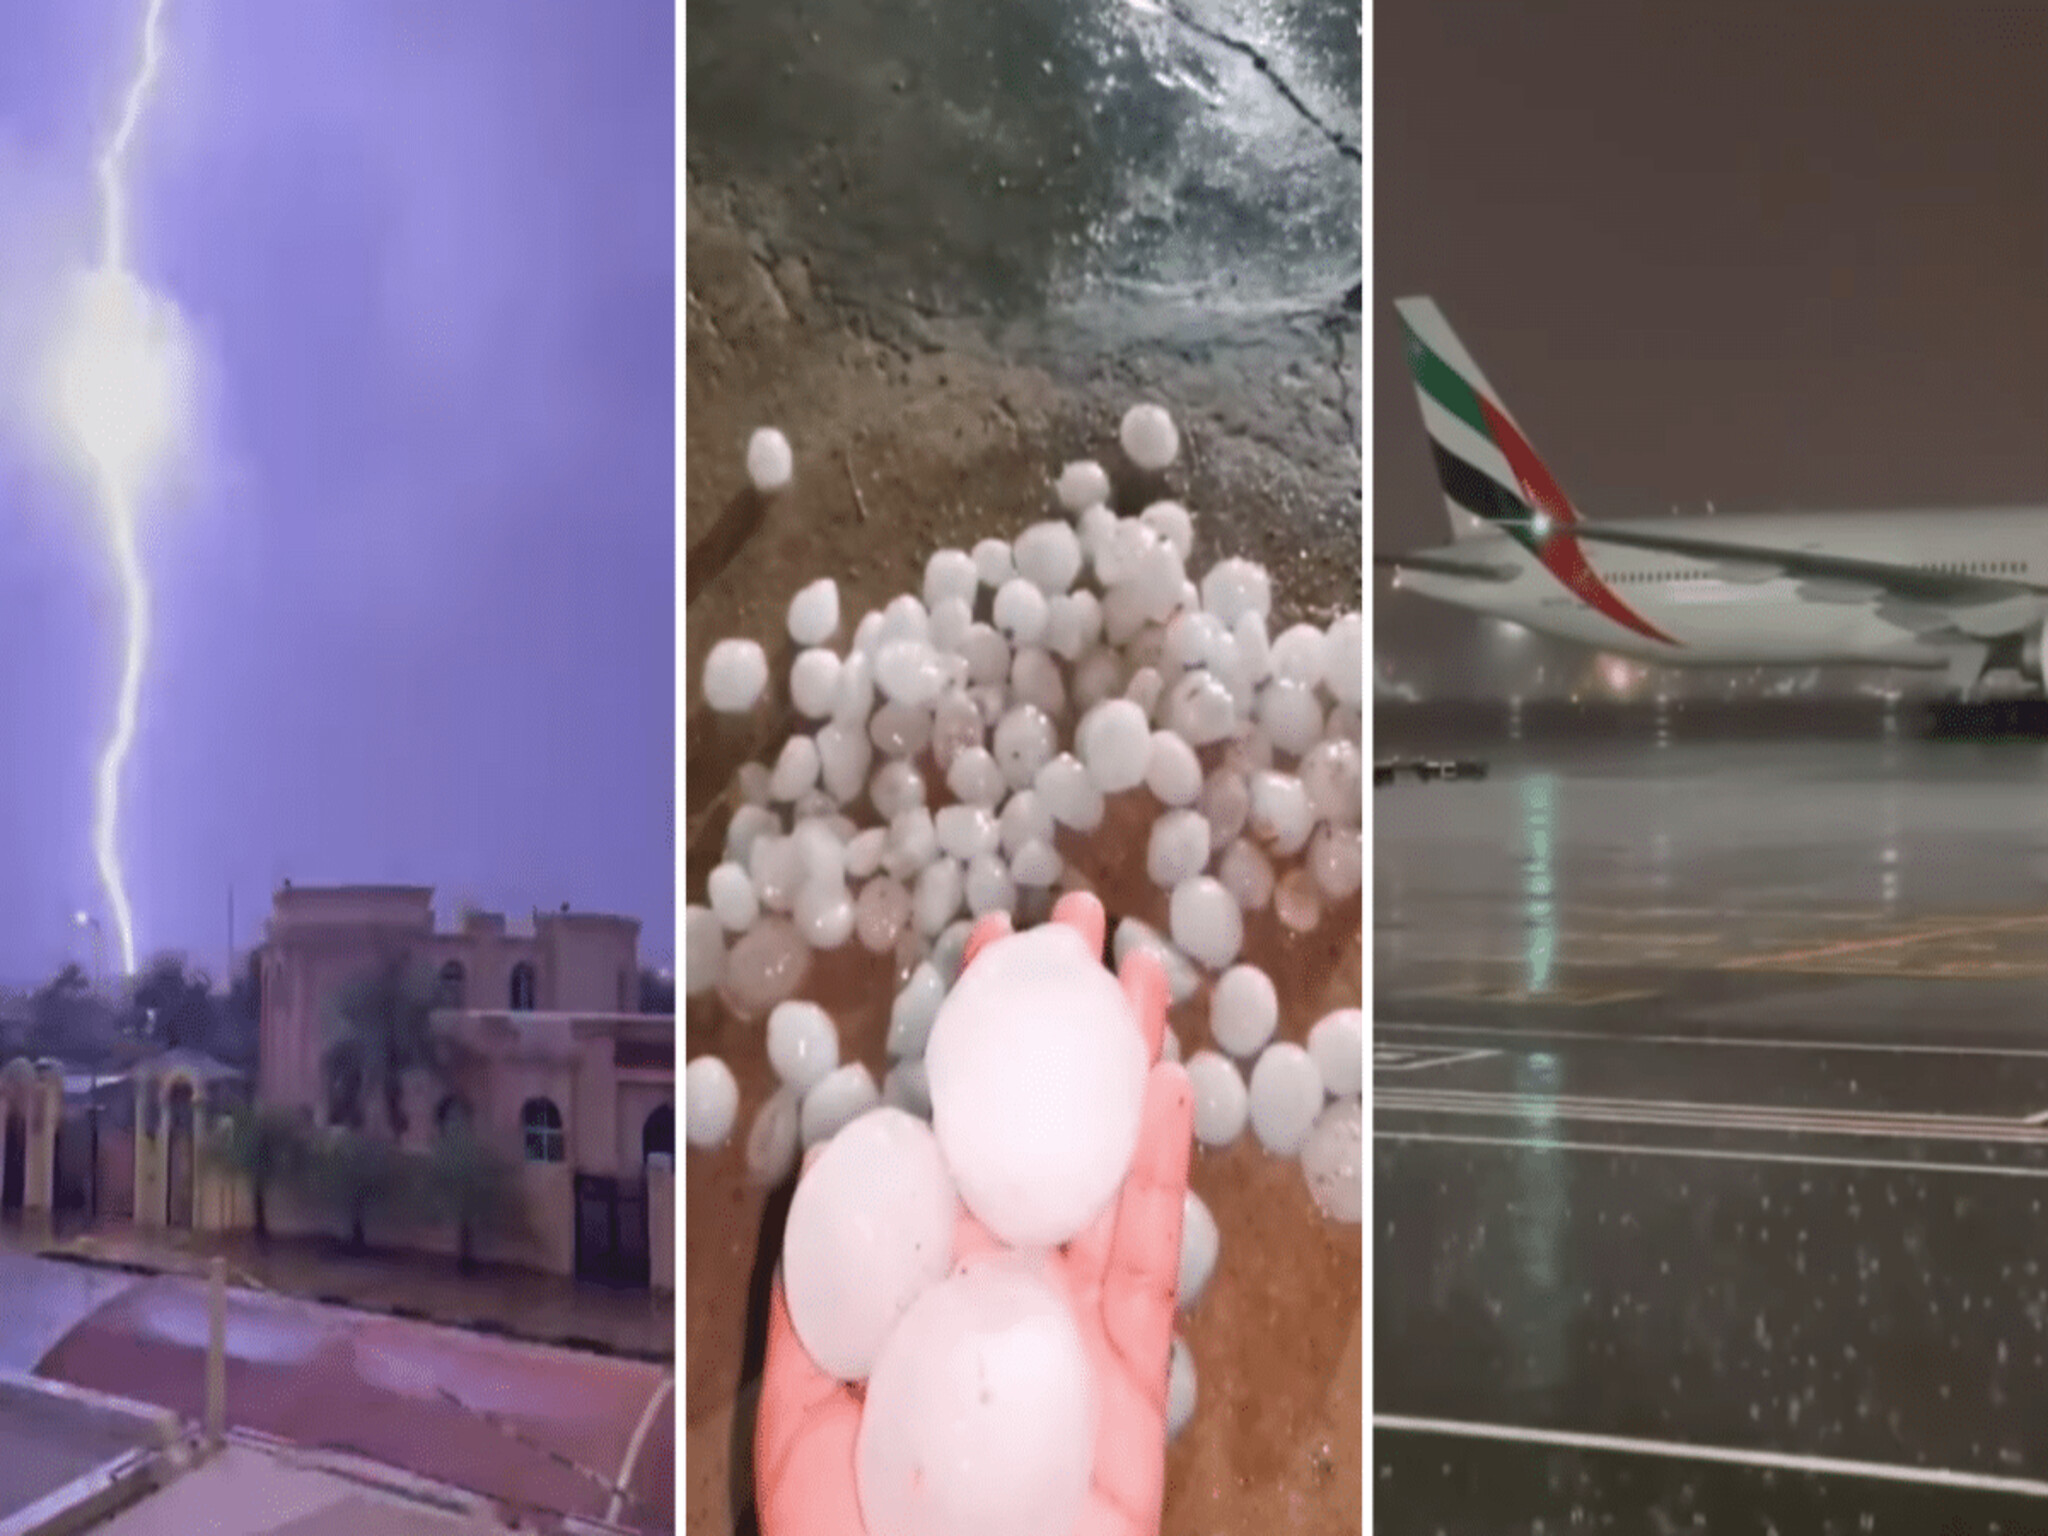 Some companies in the UAE announced the temporary suspension of their services due to the storm